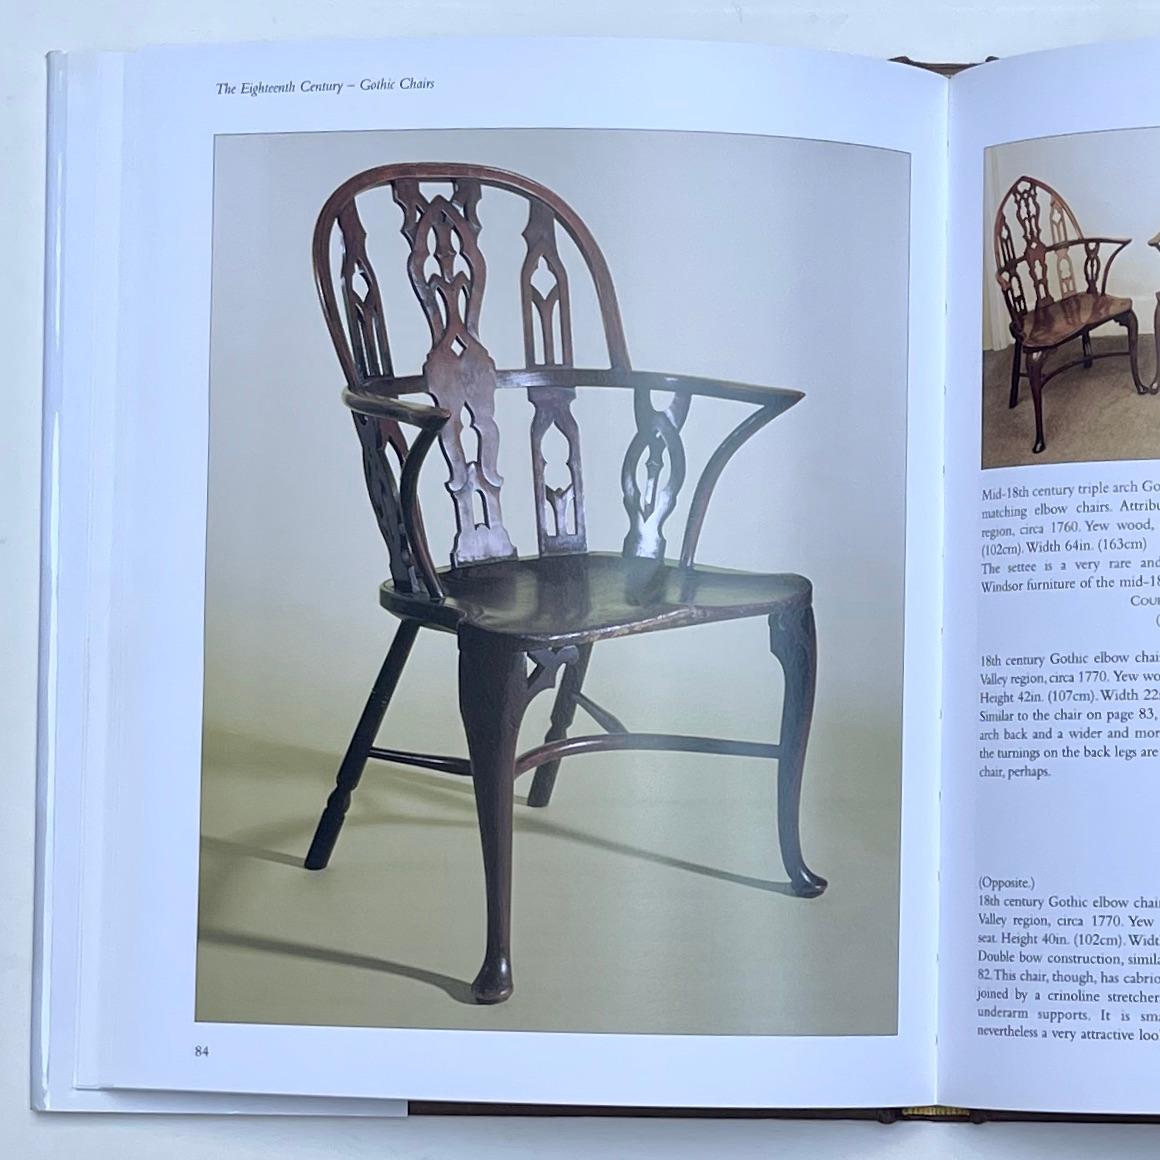 Windsor chairs 
By Michael Harding-Hill
Published by Antique Collectors Club, 2007. Hardback in dust jacket.

The Windsor Chair, whether simple or complicated in construction, plain or ornate in appearance, has always served its purpose - to be